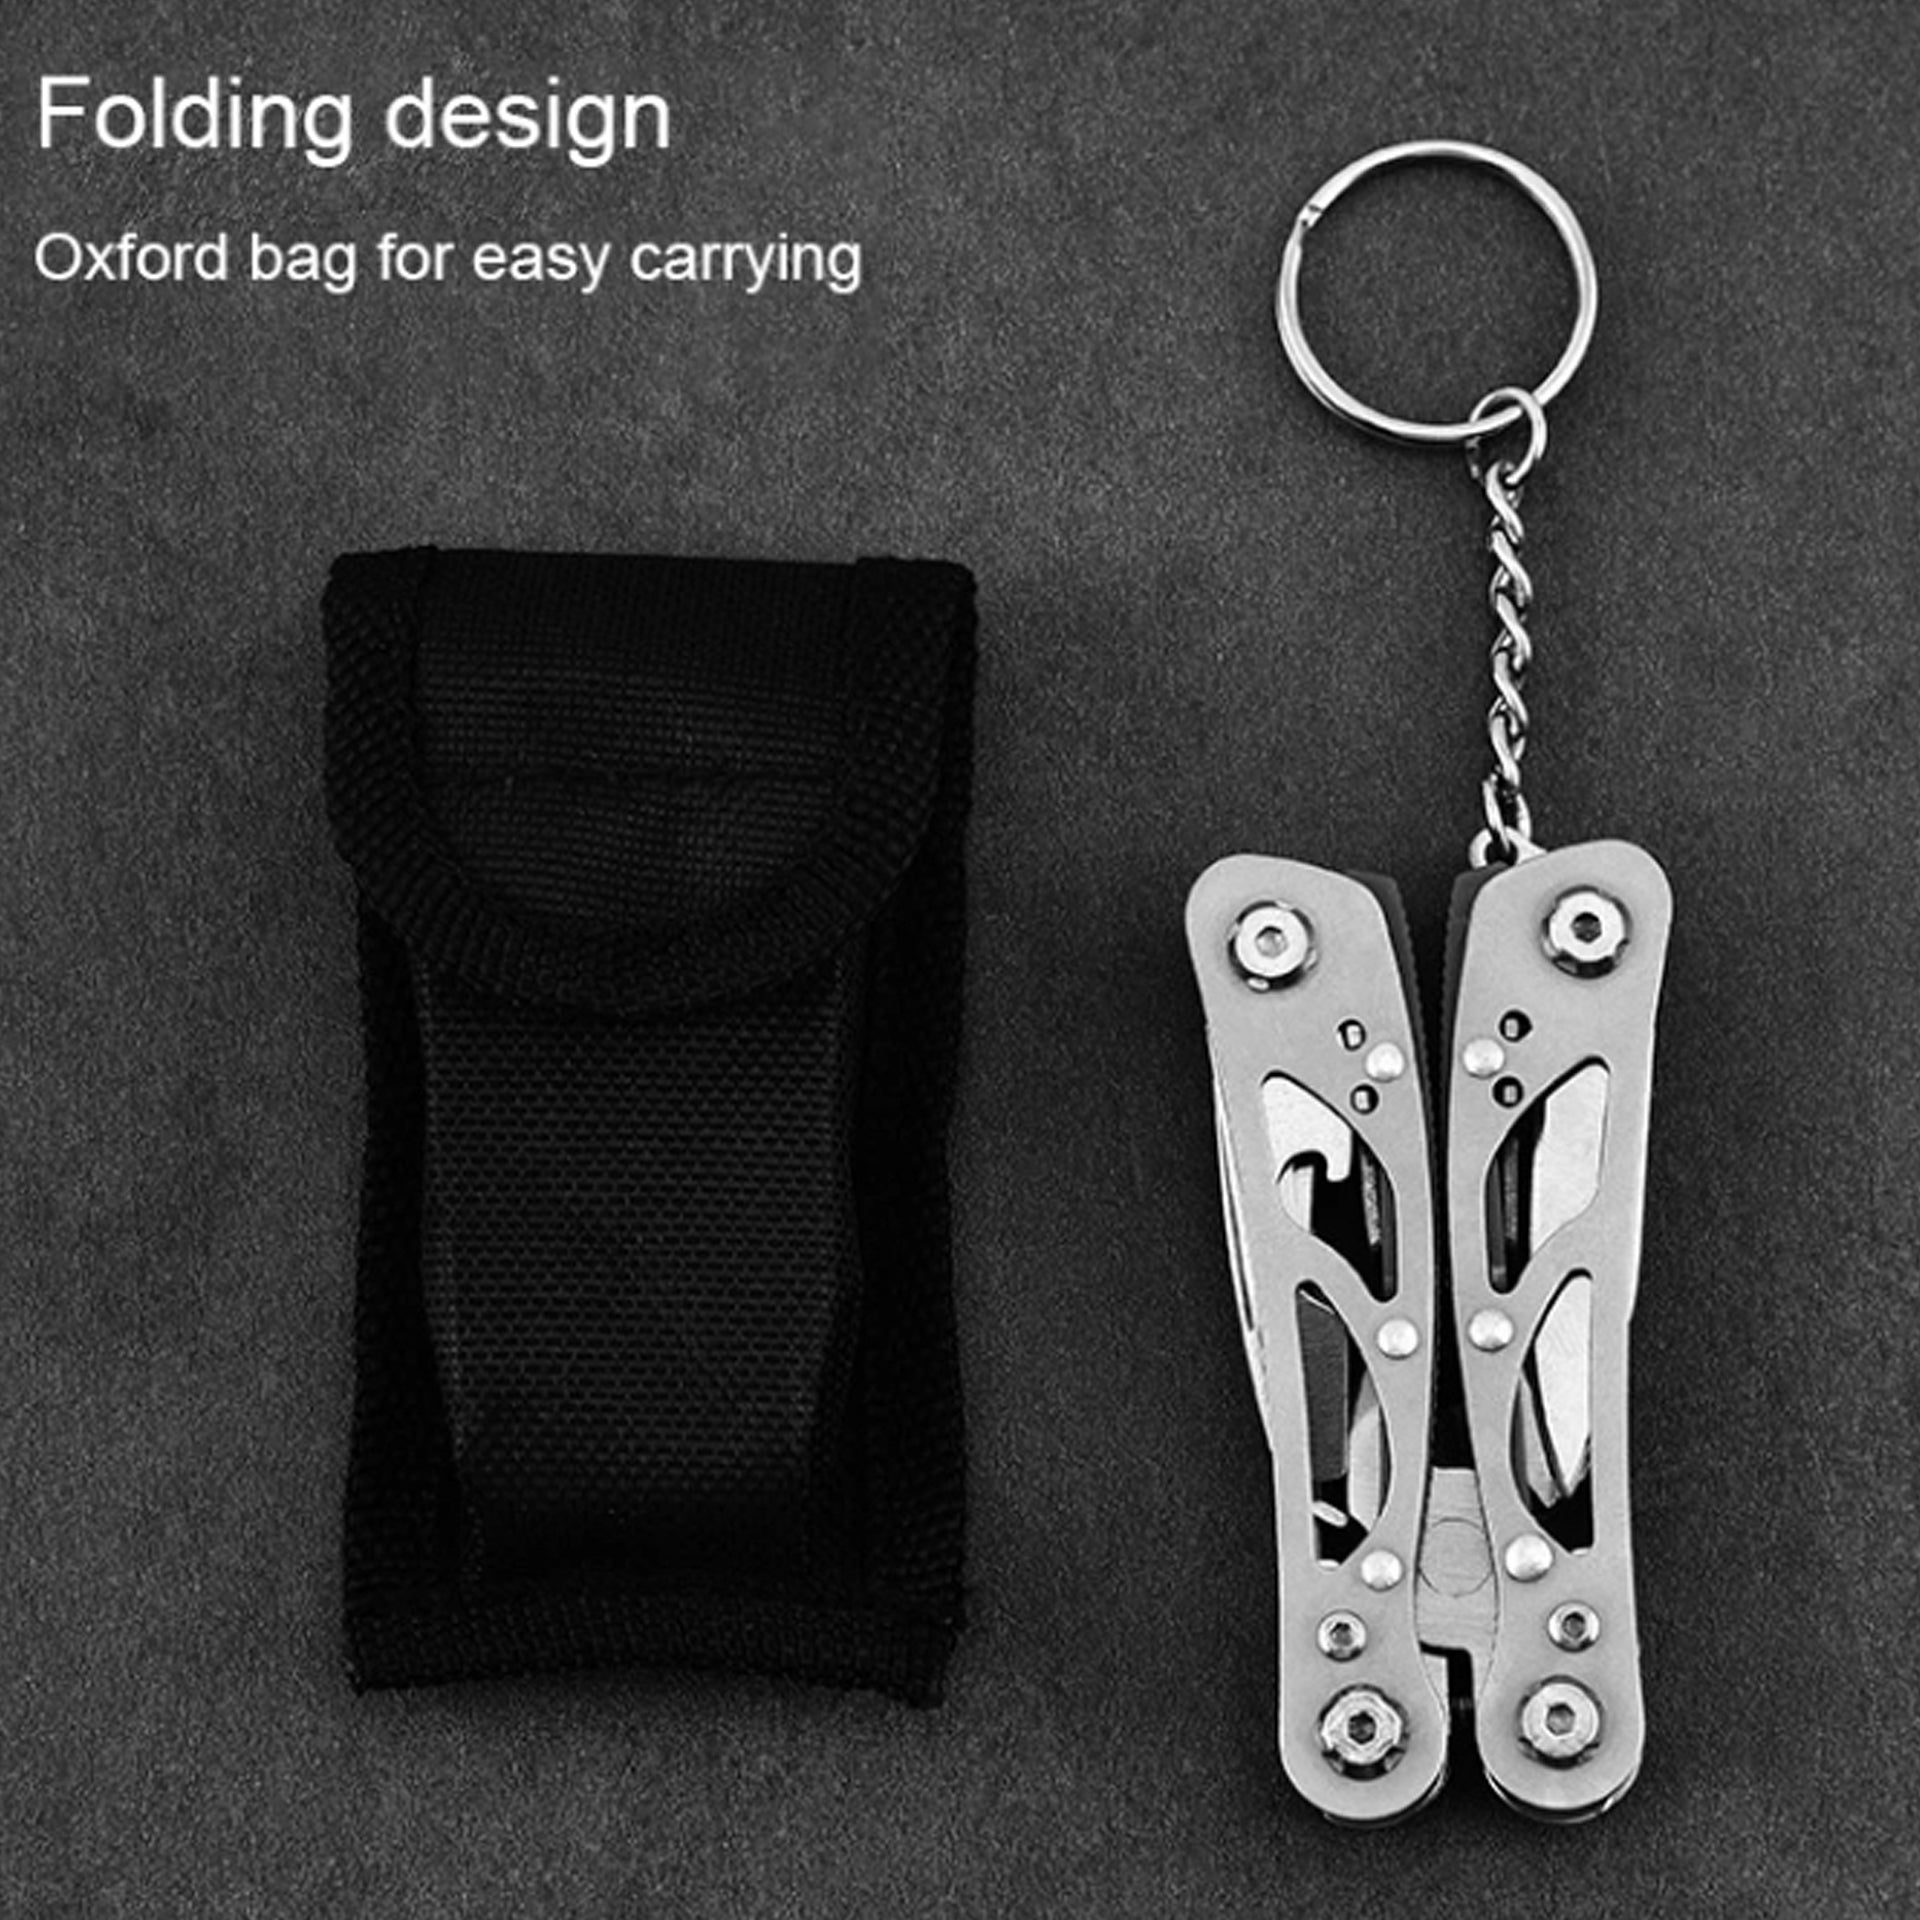 12 tools: pliers, wire cutters, large knife, small knife, cross & straight screwdriver, bottle opener, serration, vice, sharp scraper, nail file and Key ring. Compact folding design Pouch has belt loop www.defenceqstore.com.au